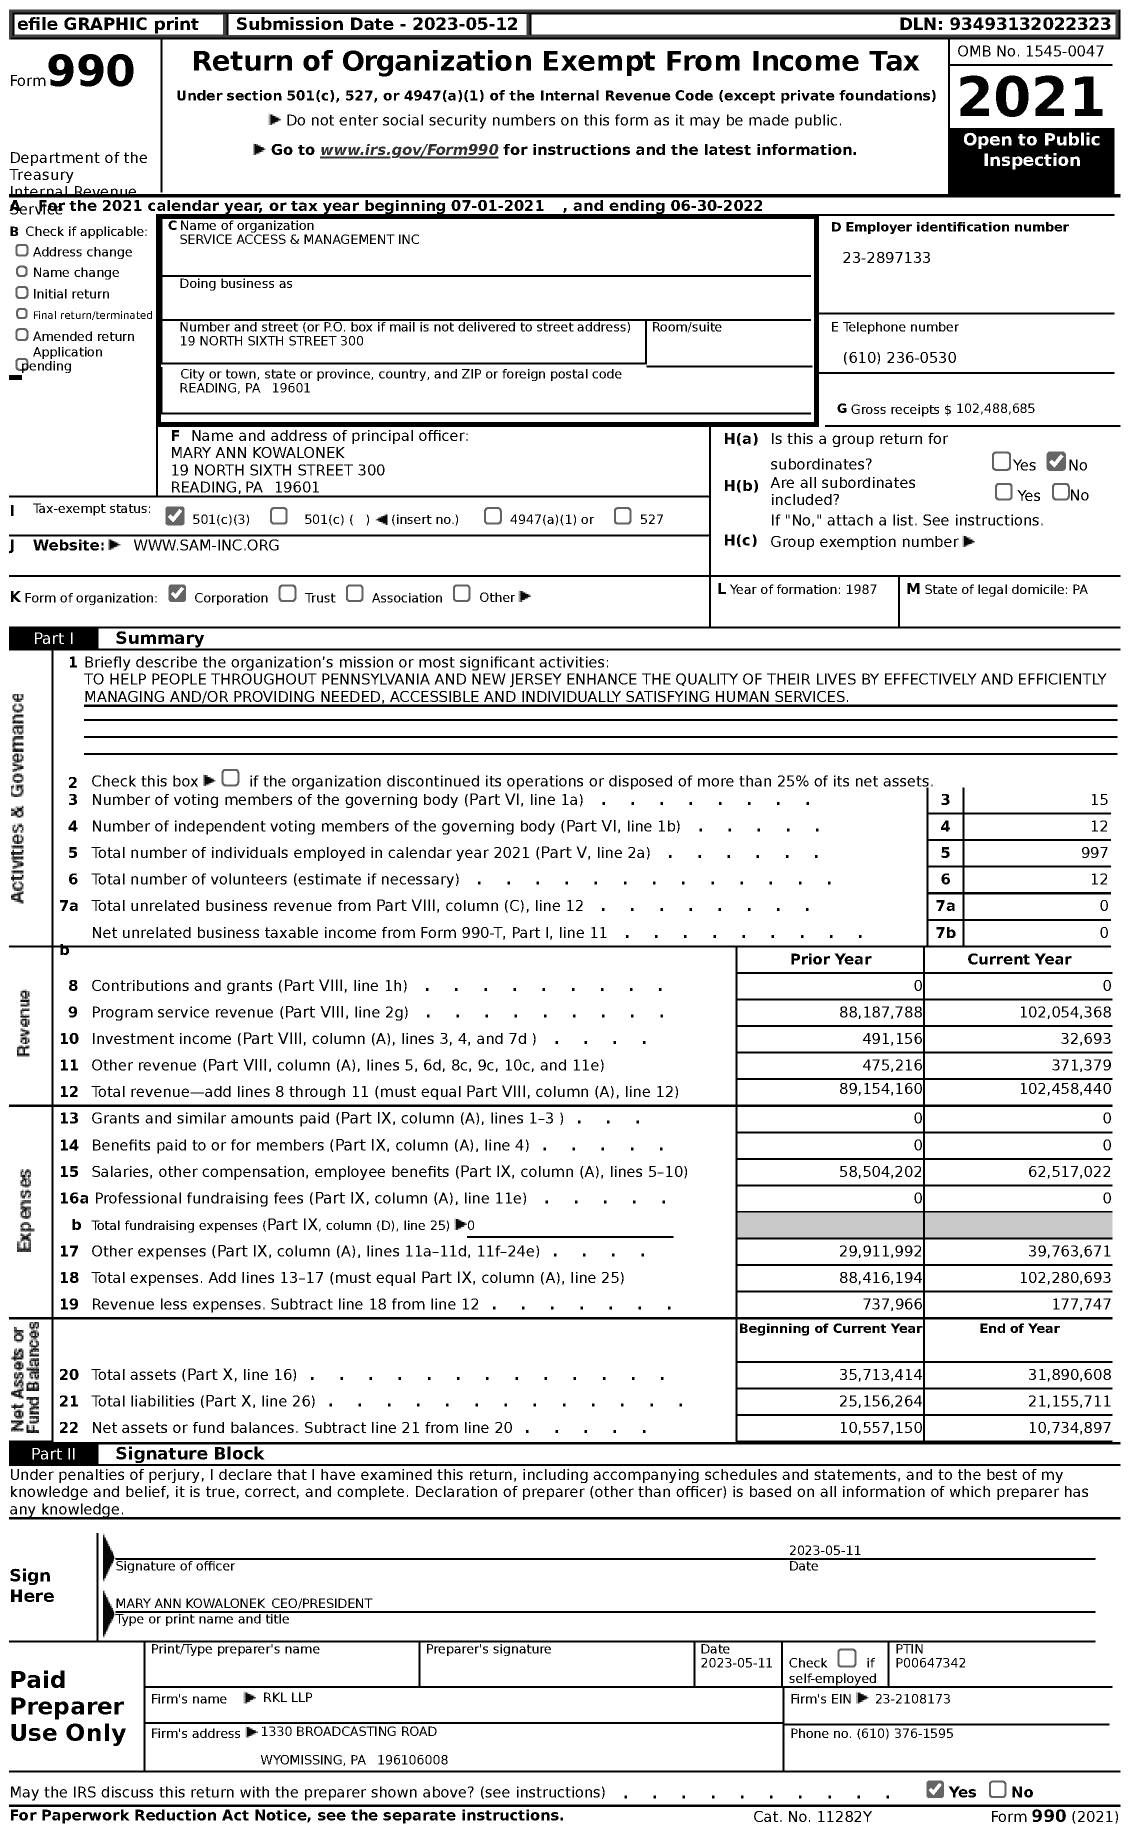 Image of first page of 2021 Form 990 for Service Access and Management (SAM)